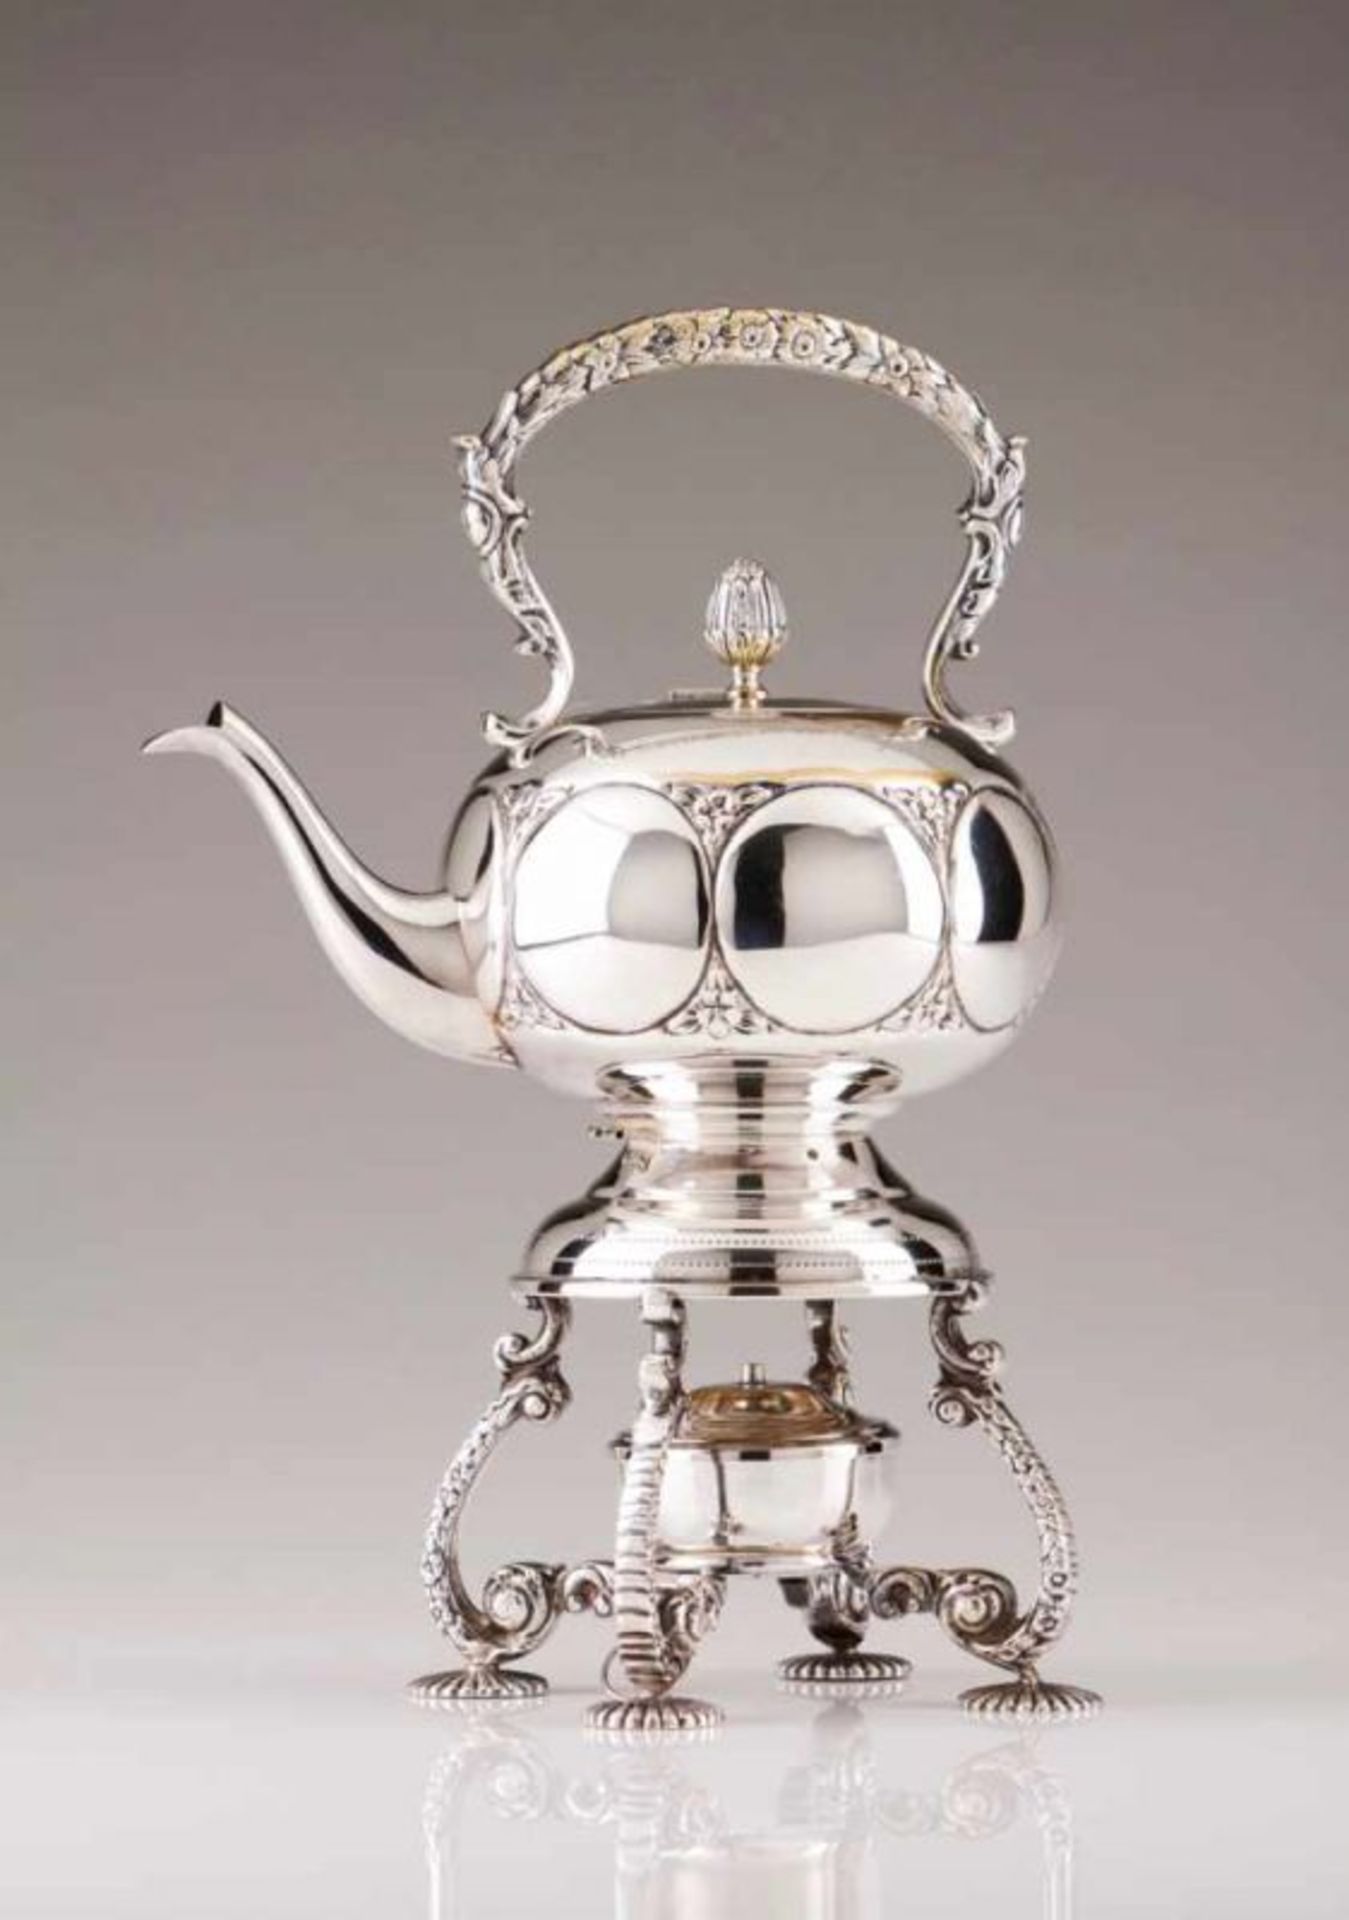 A kettle Silver plated On a stand with four legs decorated in relief, tea pot decorated in relief